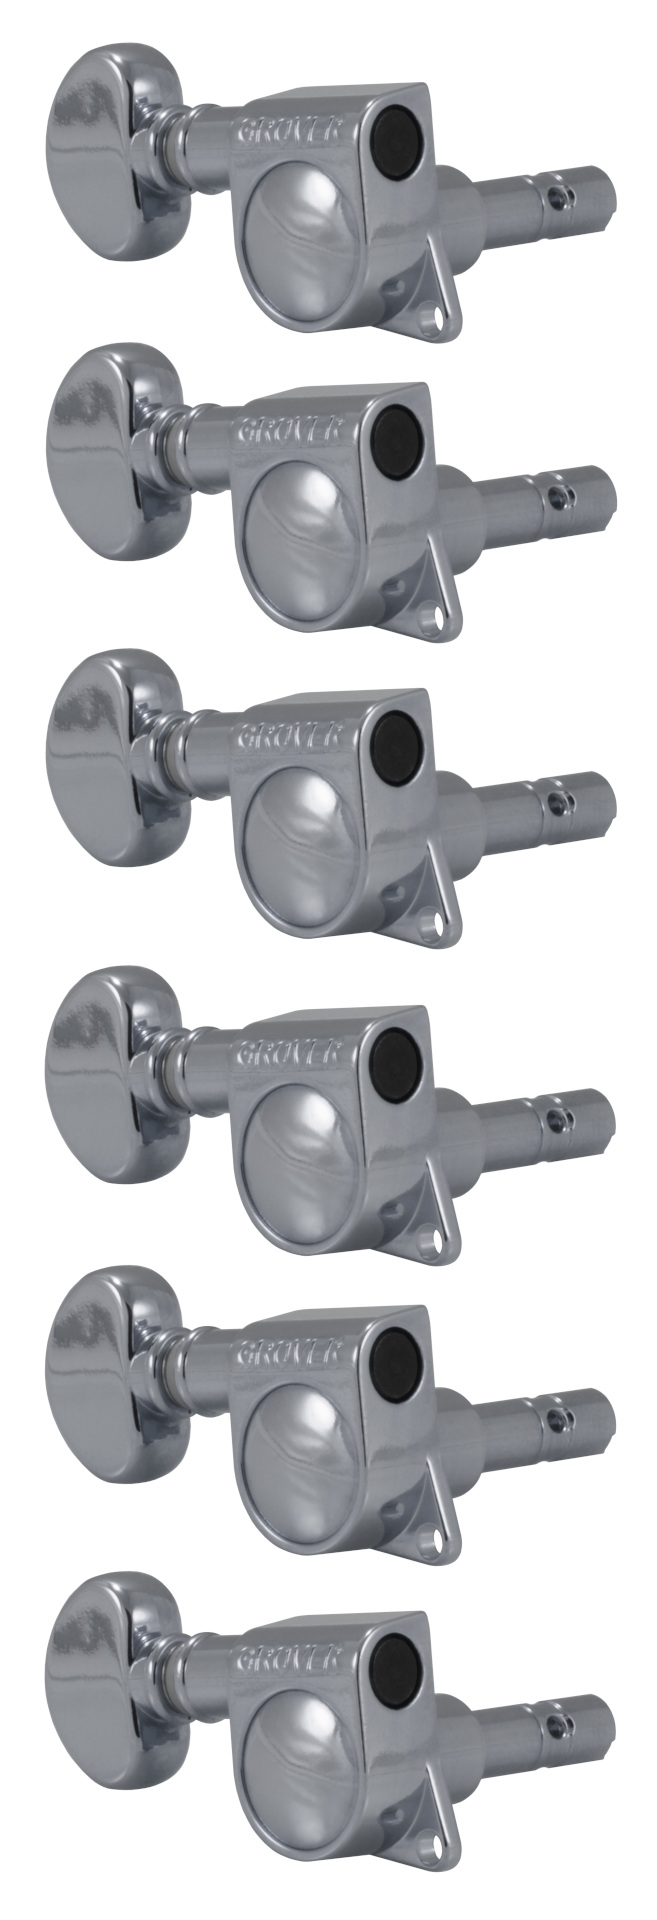 Grover 406CL6 Mini Locking Rotomatics with Round Button - Guitar Machine Heads, 6-in-Line, Lefthand, Treble Side (Right) - Chrome